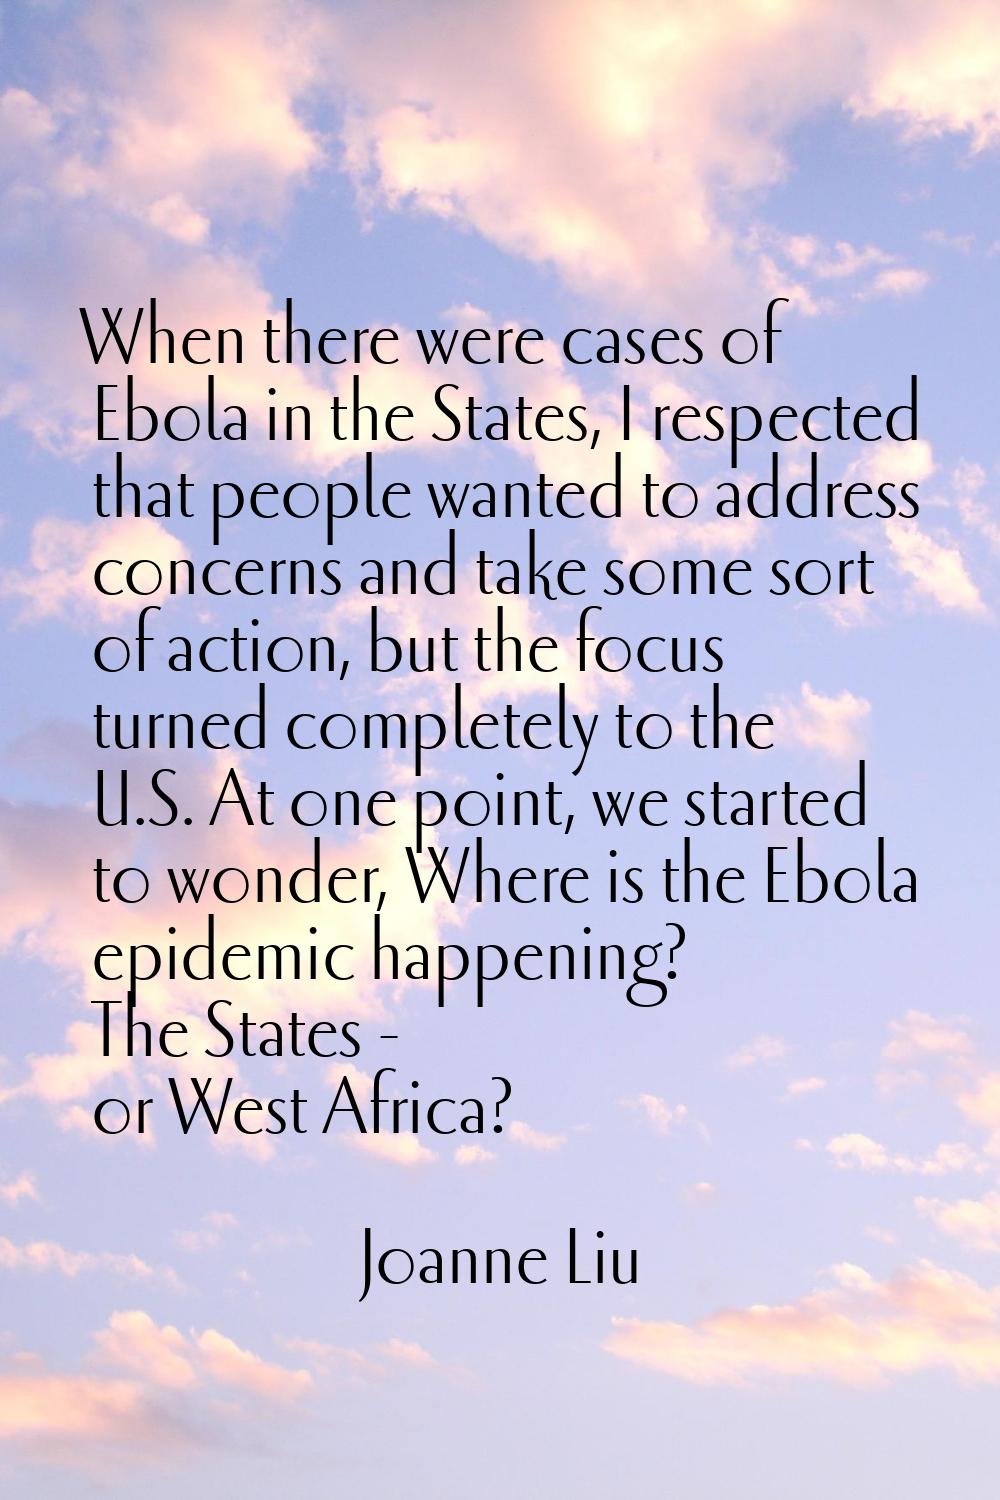 When there were cases of Ebola in the States, I respected that people wanted to address concerns an